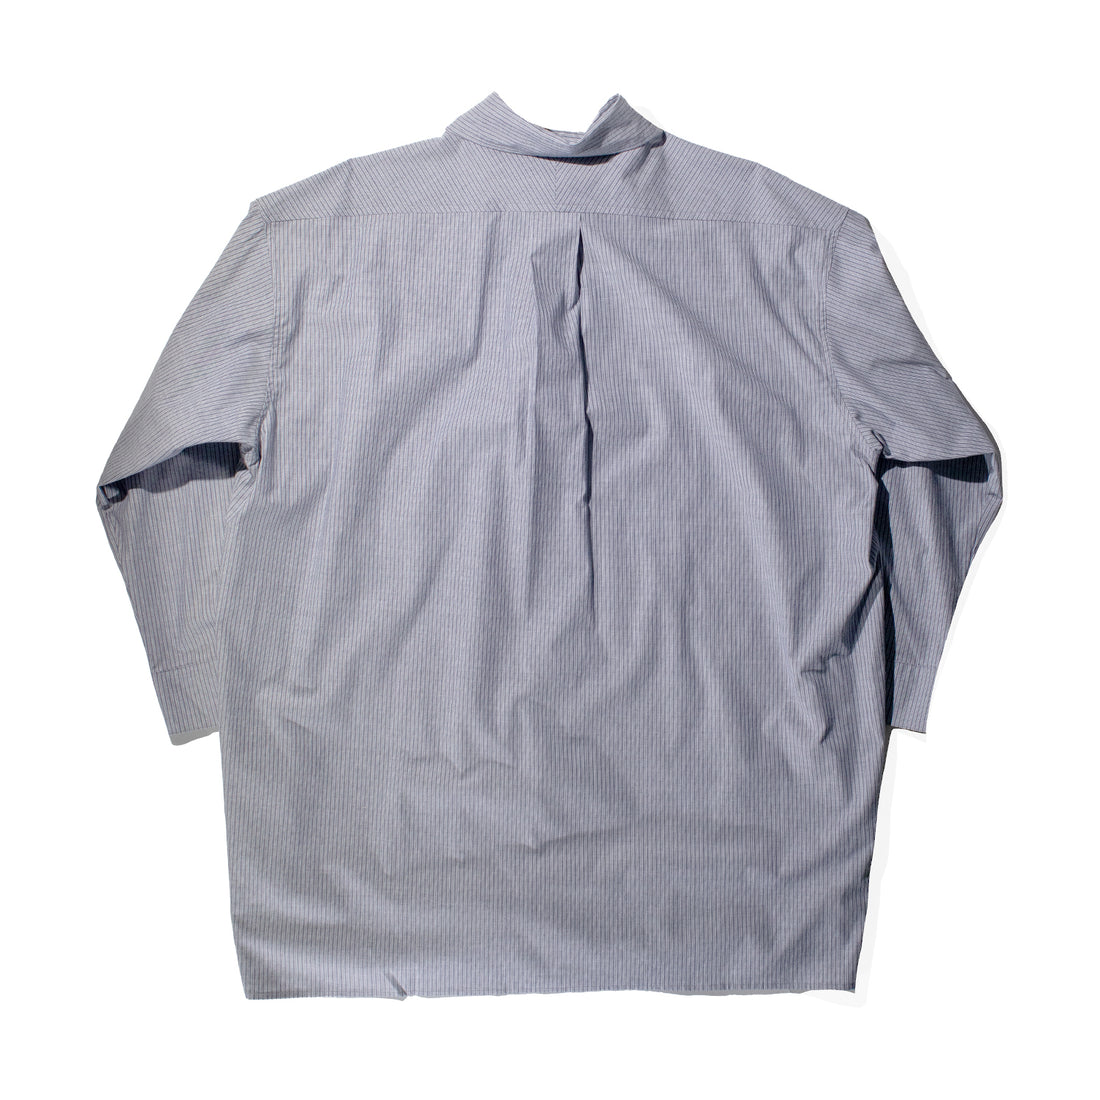 Toit Volant Laurence Shirt in Navy/White